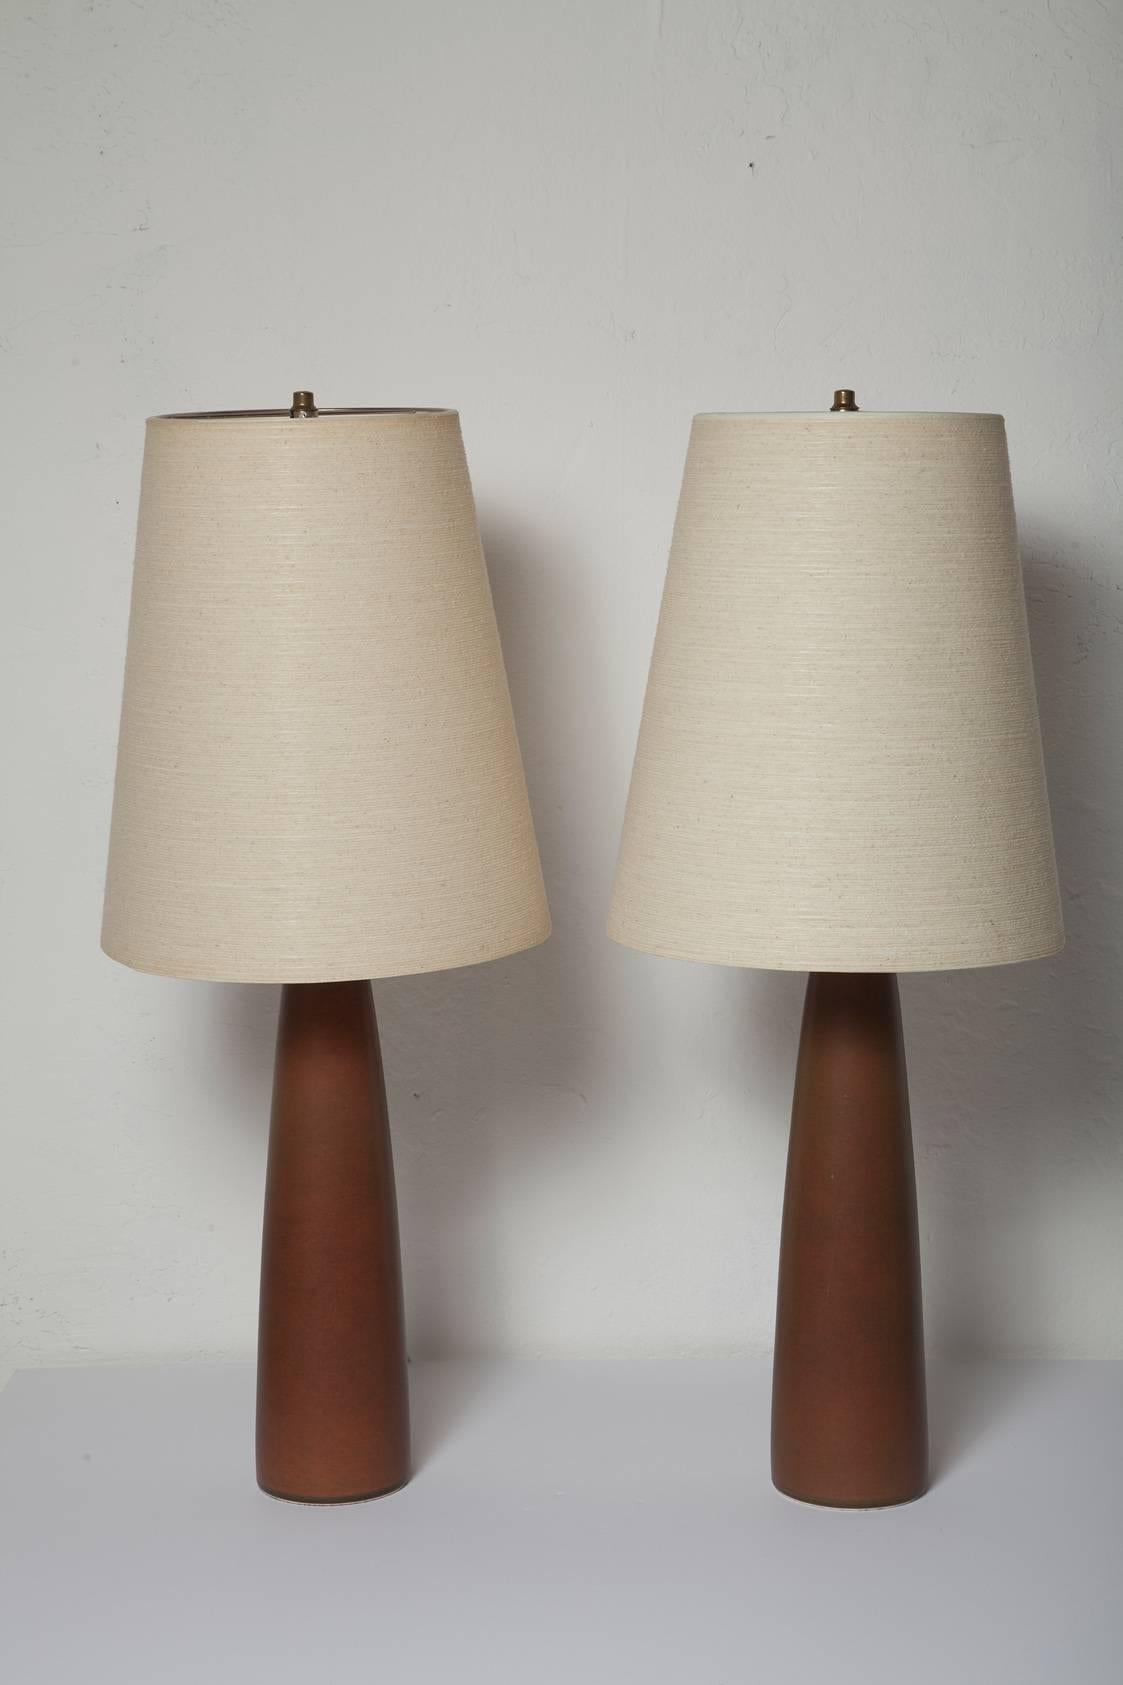 Tall, handsome pair of lamps by Lotte and Gunnar Bostlund with warm brown ceramic bases and original jute wrapped fiberglass shades. Photos show the magical effect light gives to the textured shades with both high and low wattage.